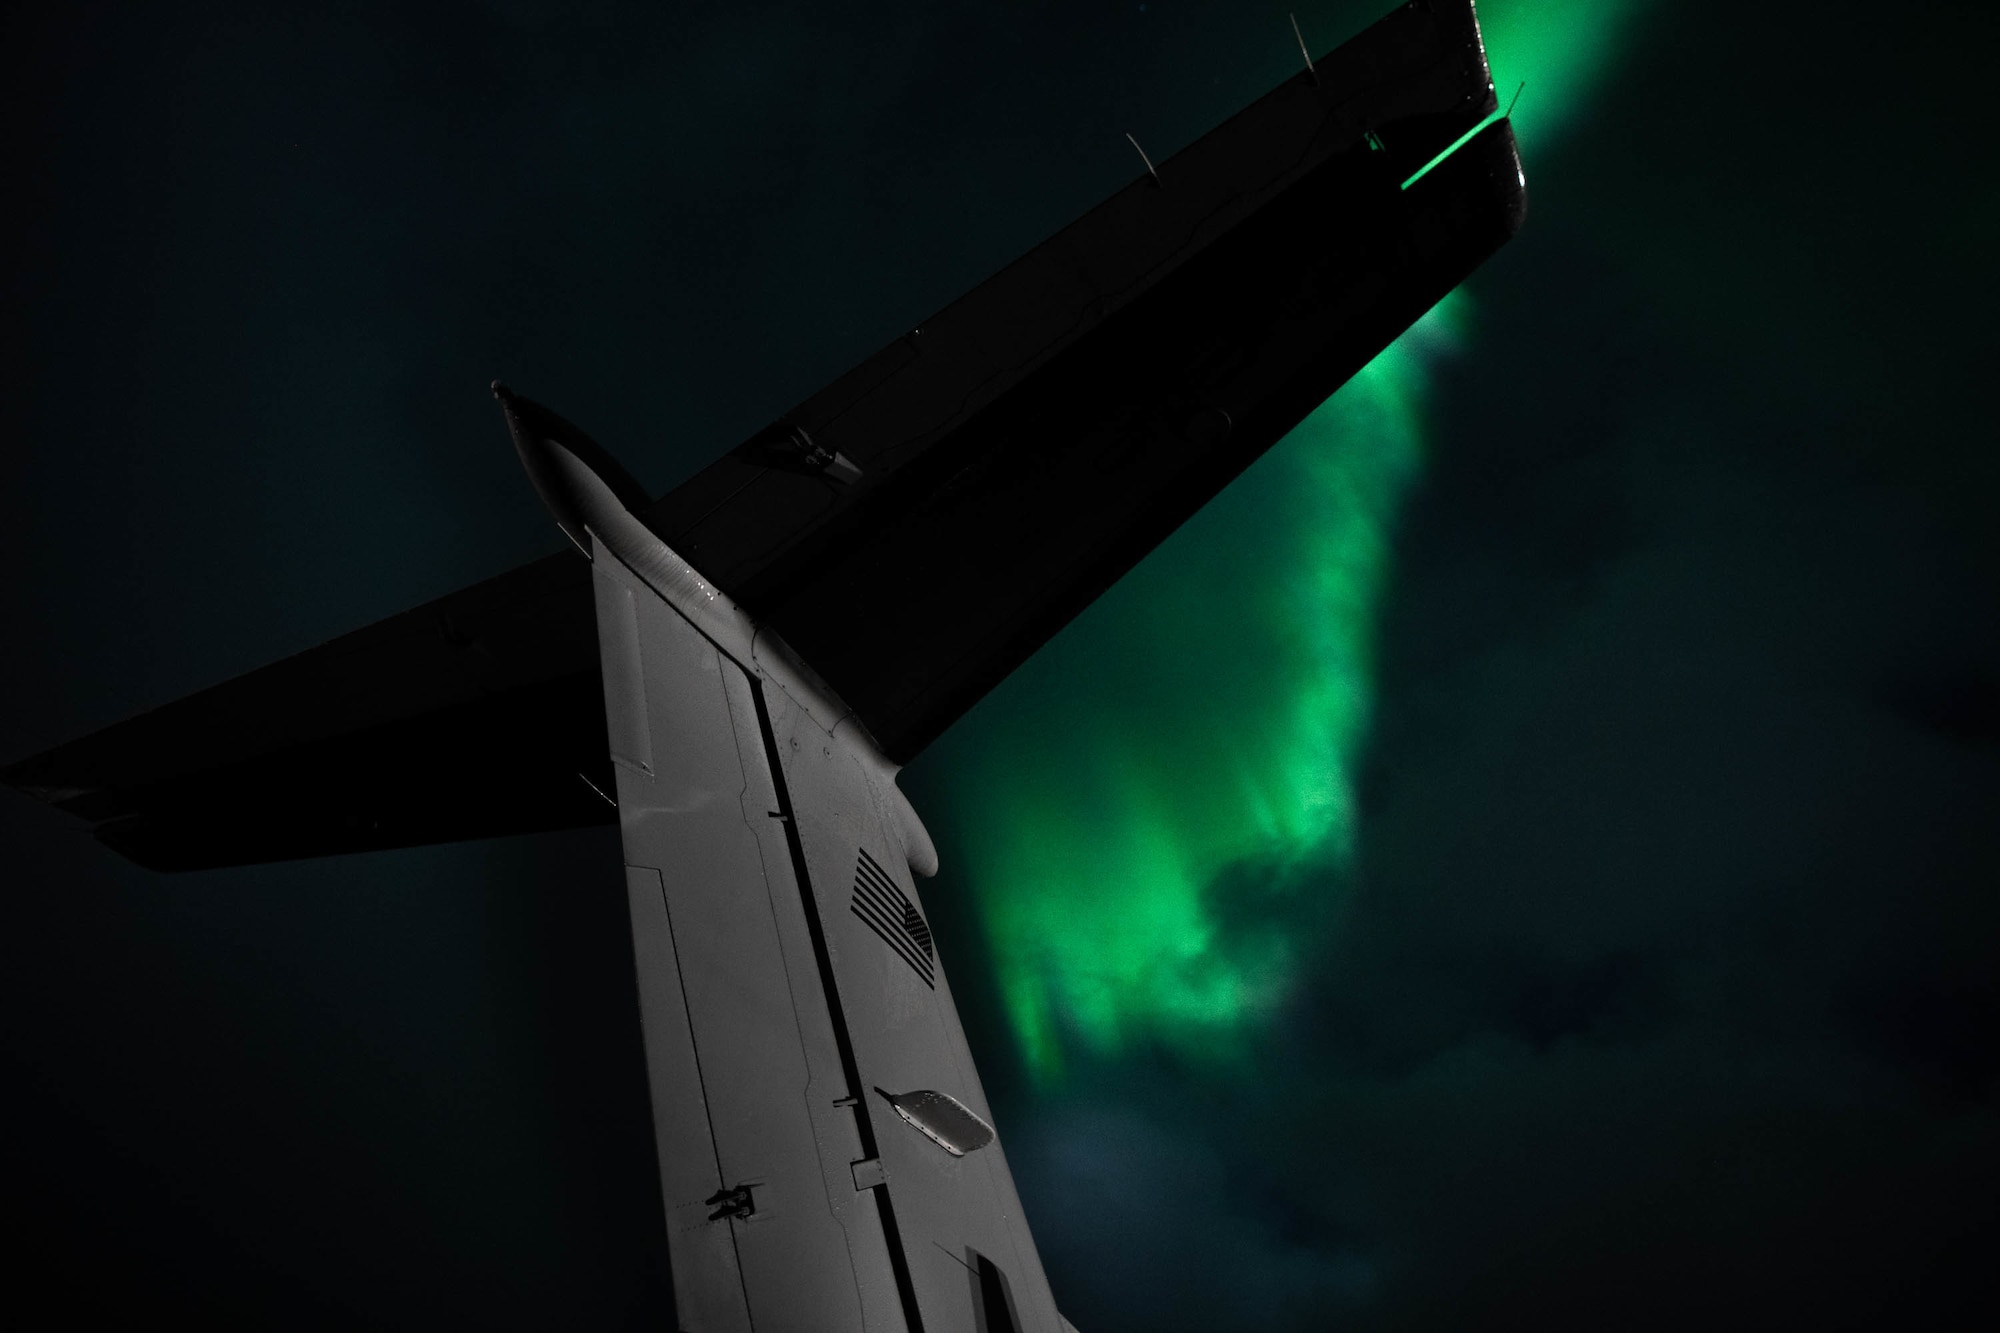 The tail of a 137th Special Operations Wing MC-12W appears struck by the Aurora Borealis while participating in ATREUS 22-4 at Andøya Space Defense Range, Norway, Nov. 7, 2022. Two Air Force Special Operations Command wings partnered in a total force initiative to conduct the first live-fire demonstration of Rapid Dragon, a long-range palletized munitions system. (U.S. Air National Guard photo by Tech. Sgt. Brigette Waltermire)